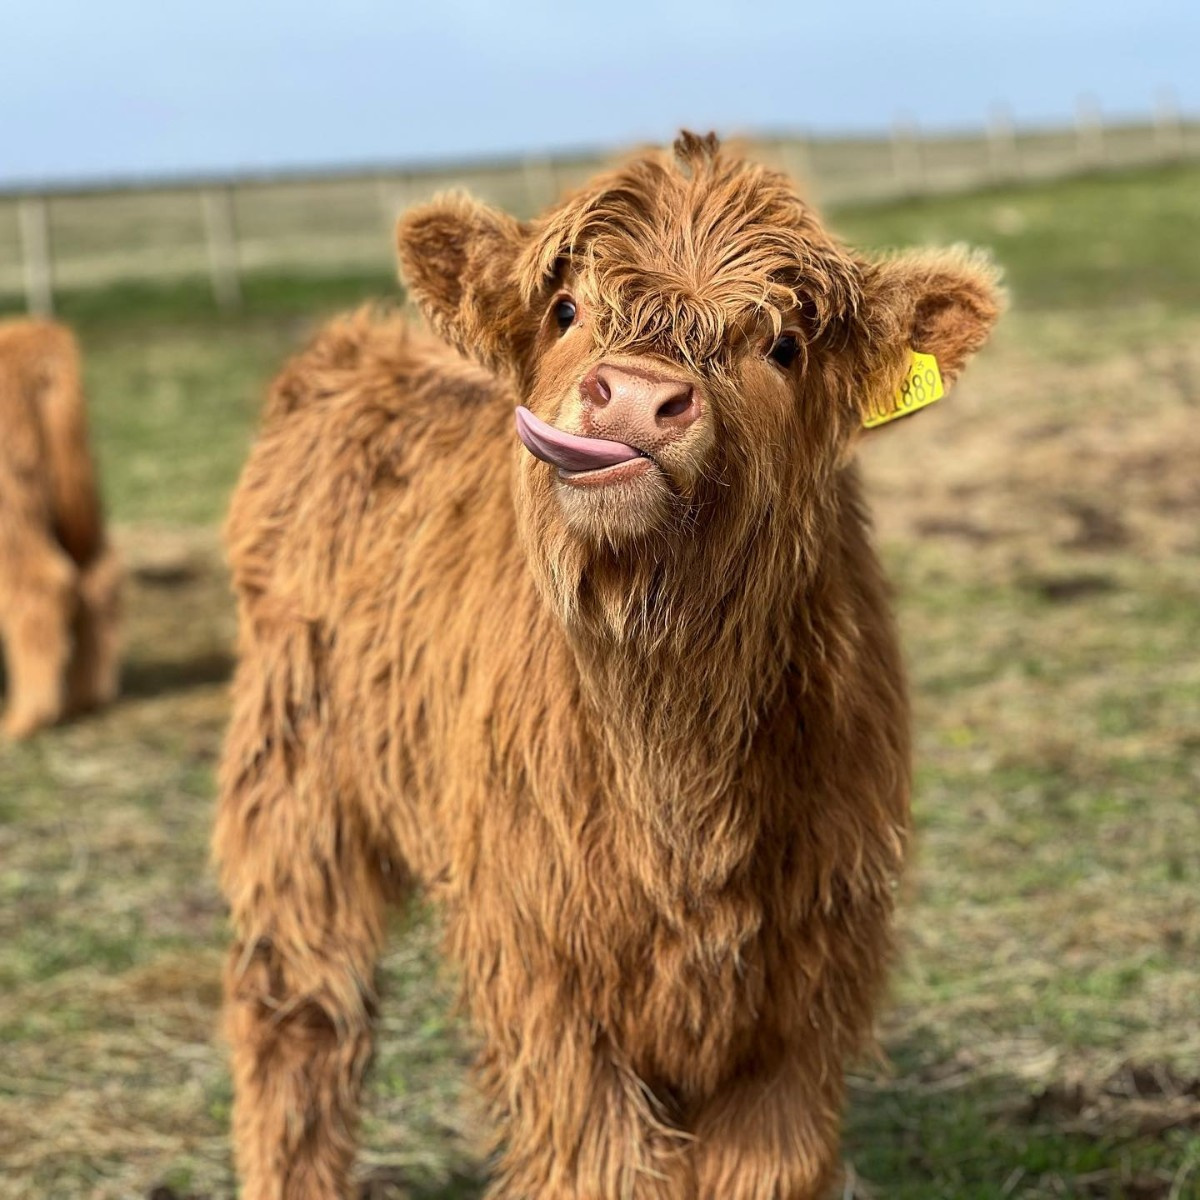 Tongues oot for #Coosday! 😜🐮

📍 North Uist, Outer Hebrides
📷 Instagram.com/the_hebridean_…

Only in Scotland - Outer Hebrides lovetovisitscotland.com/only-in-scotla…